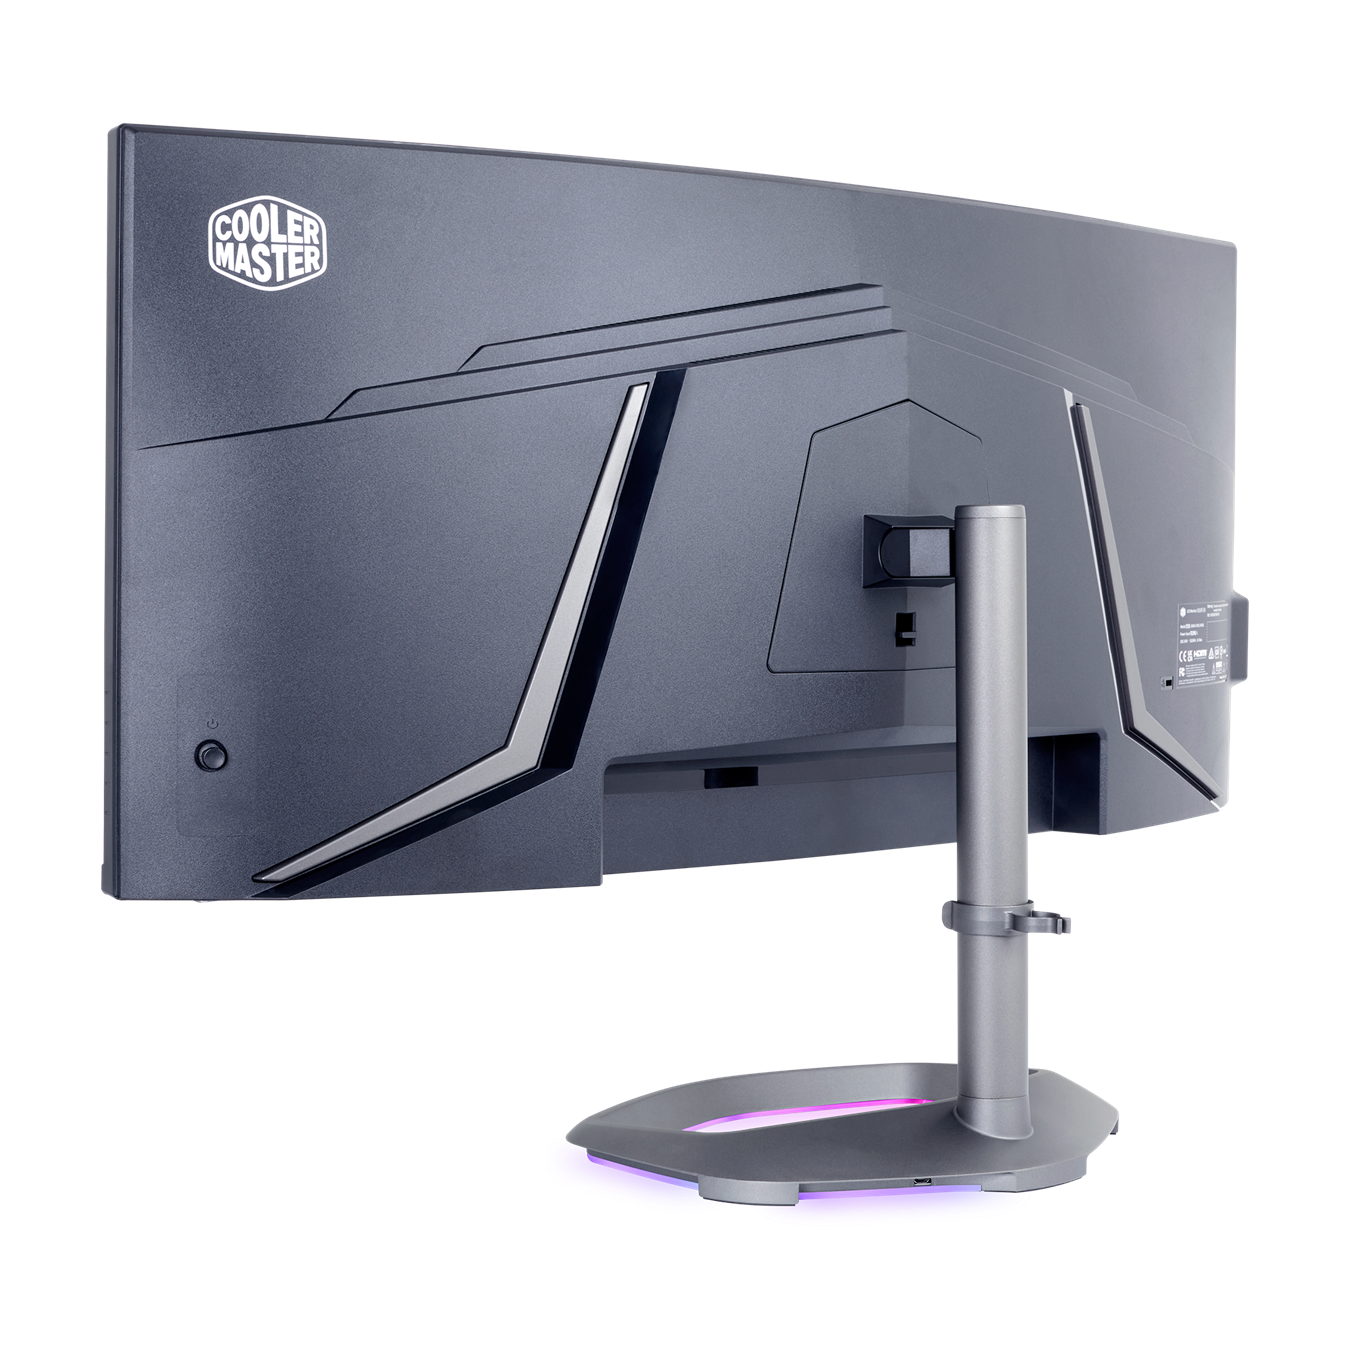 GM34-CWQ ARGB 34" Curved Gaming Monitor - Using the MasterPlus+ app, you can fully customize the ARGB lighting built into the Halo stand.